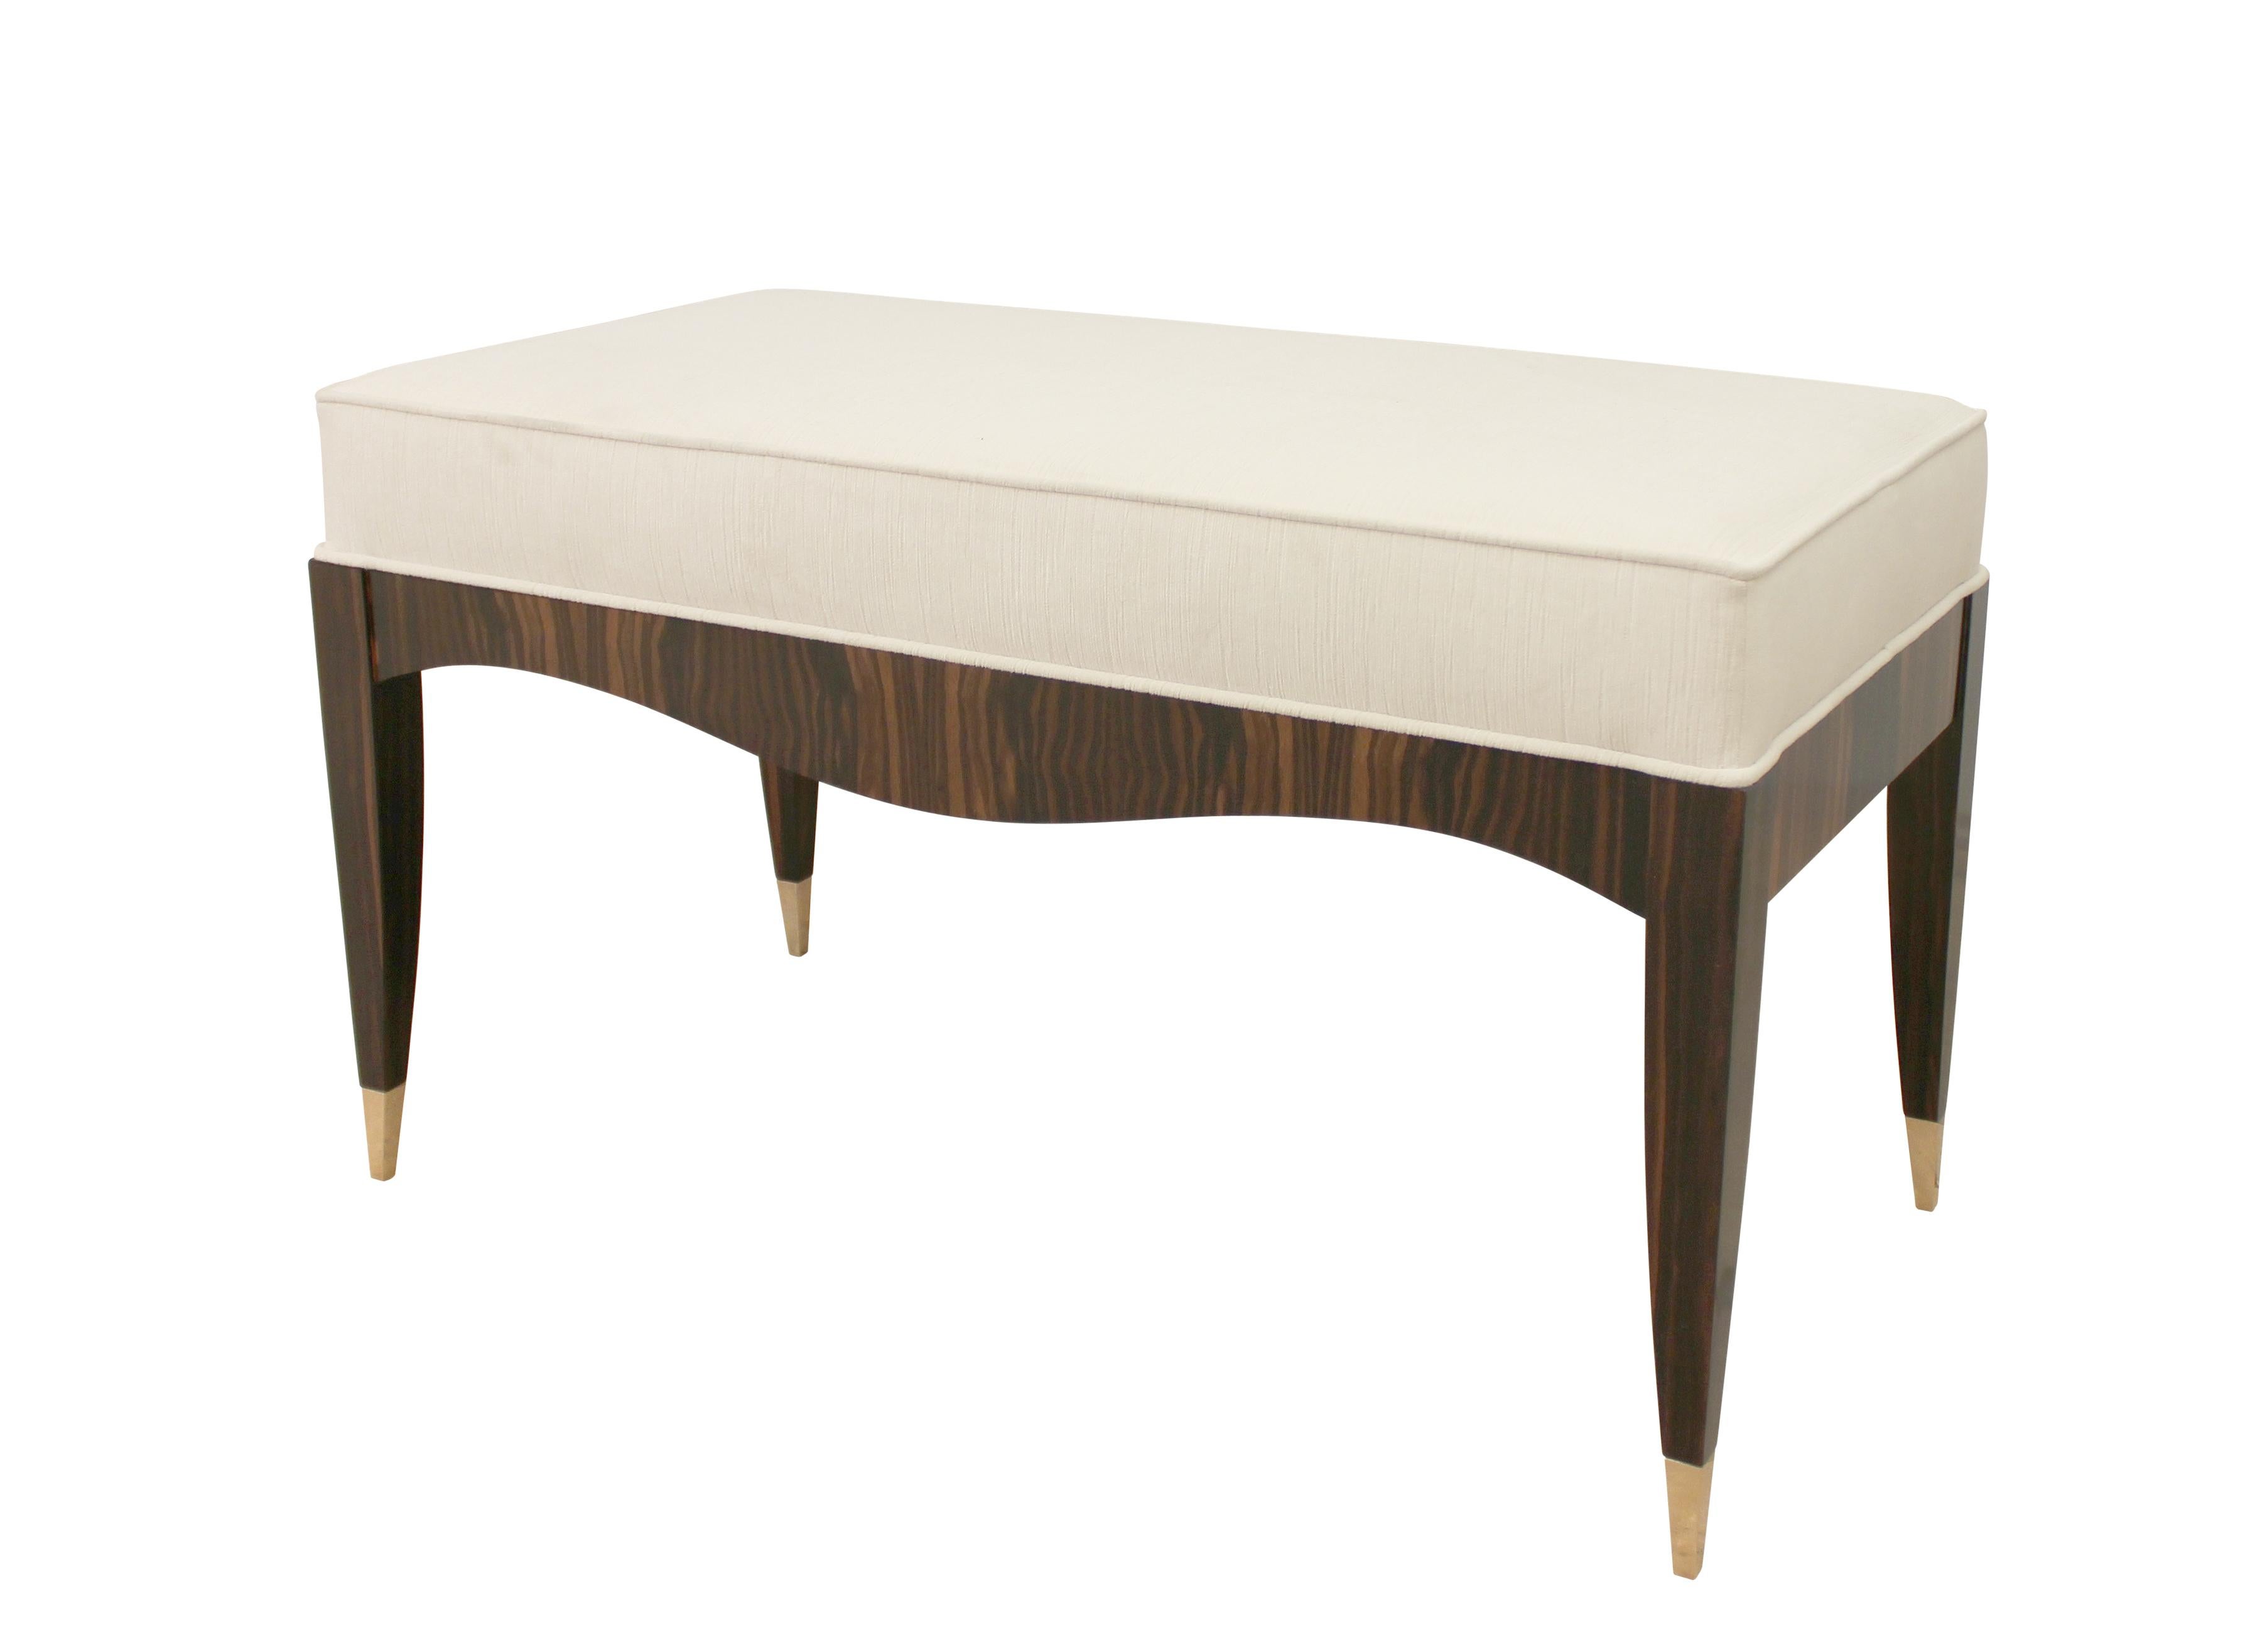 Art Deco inspired bench in ebony Macassar veneer with cast bronze toe caps is made with hardwood frame and veneered in bookmatched ebony Macassar veneer with satin lacquer finish. Polished and lacquered bronze toe caps draw the eye along the curves